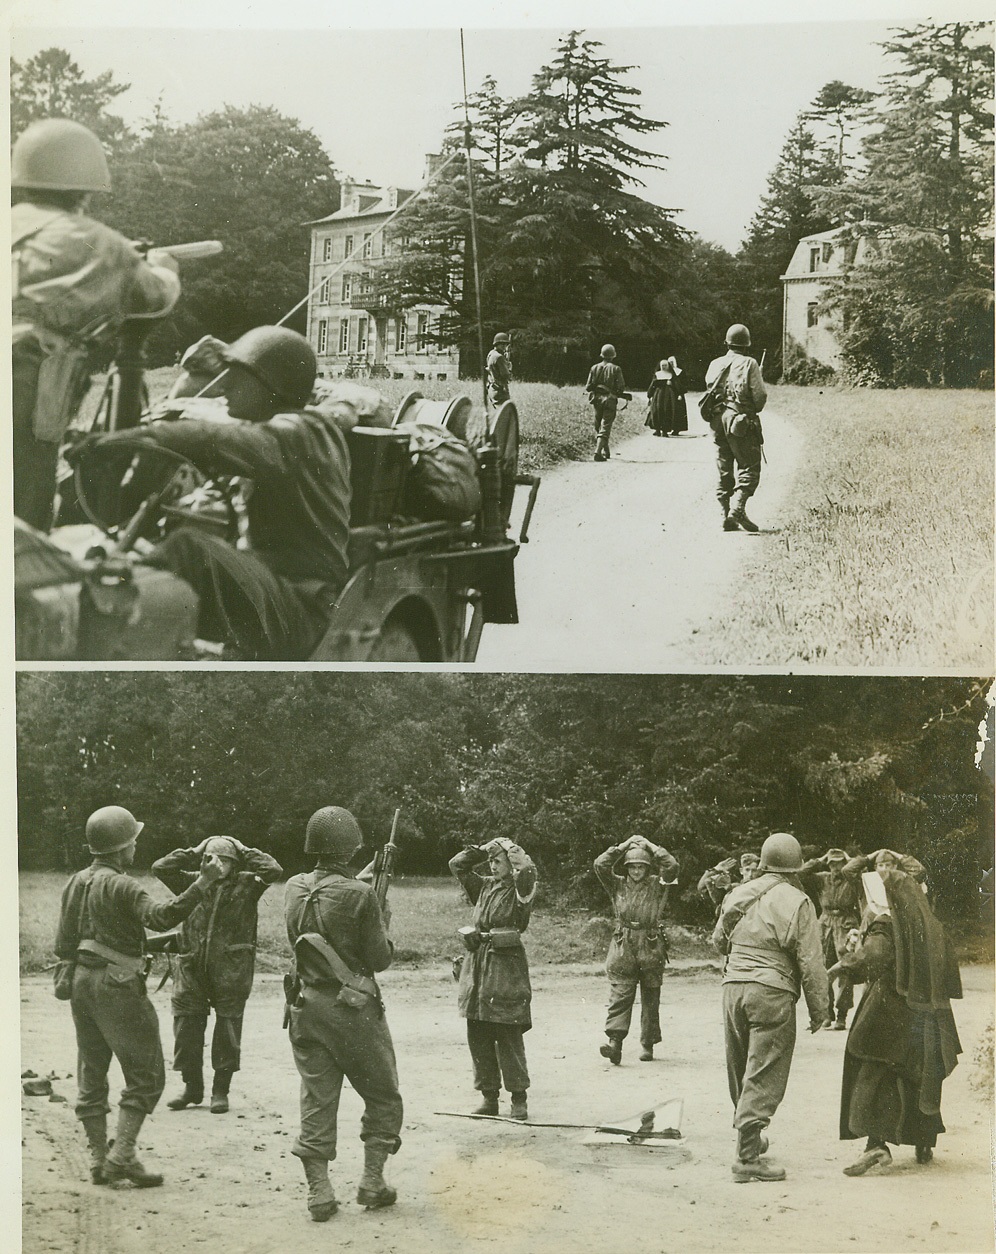 Surrender In Avranches, 8/10/1944. France—During the drive for Avranches an American patrol heads cautiously toward a convent where Nazi soldiers are believed to have fortified themselves. In the top photo two nuns come out to meet the patrol bearing the German offer of surrender. Capt. Albert J. Owen, nearest the nuns, accepted the surrender. In the bottom photo, German soldiers, hands on their heads, come out of their convent hiding place. Looking on is one of the nuns who negotiated the surrender. Credit: ACME;